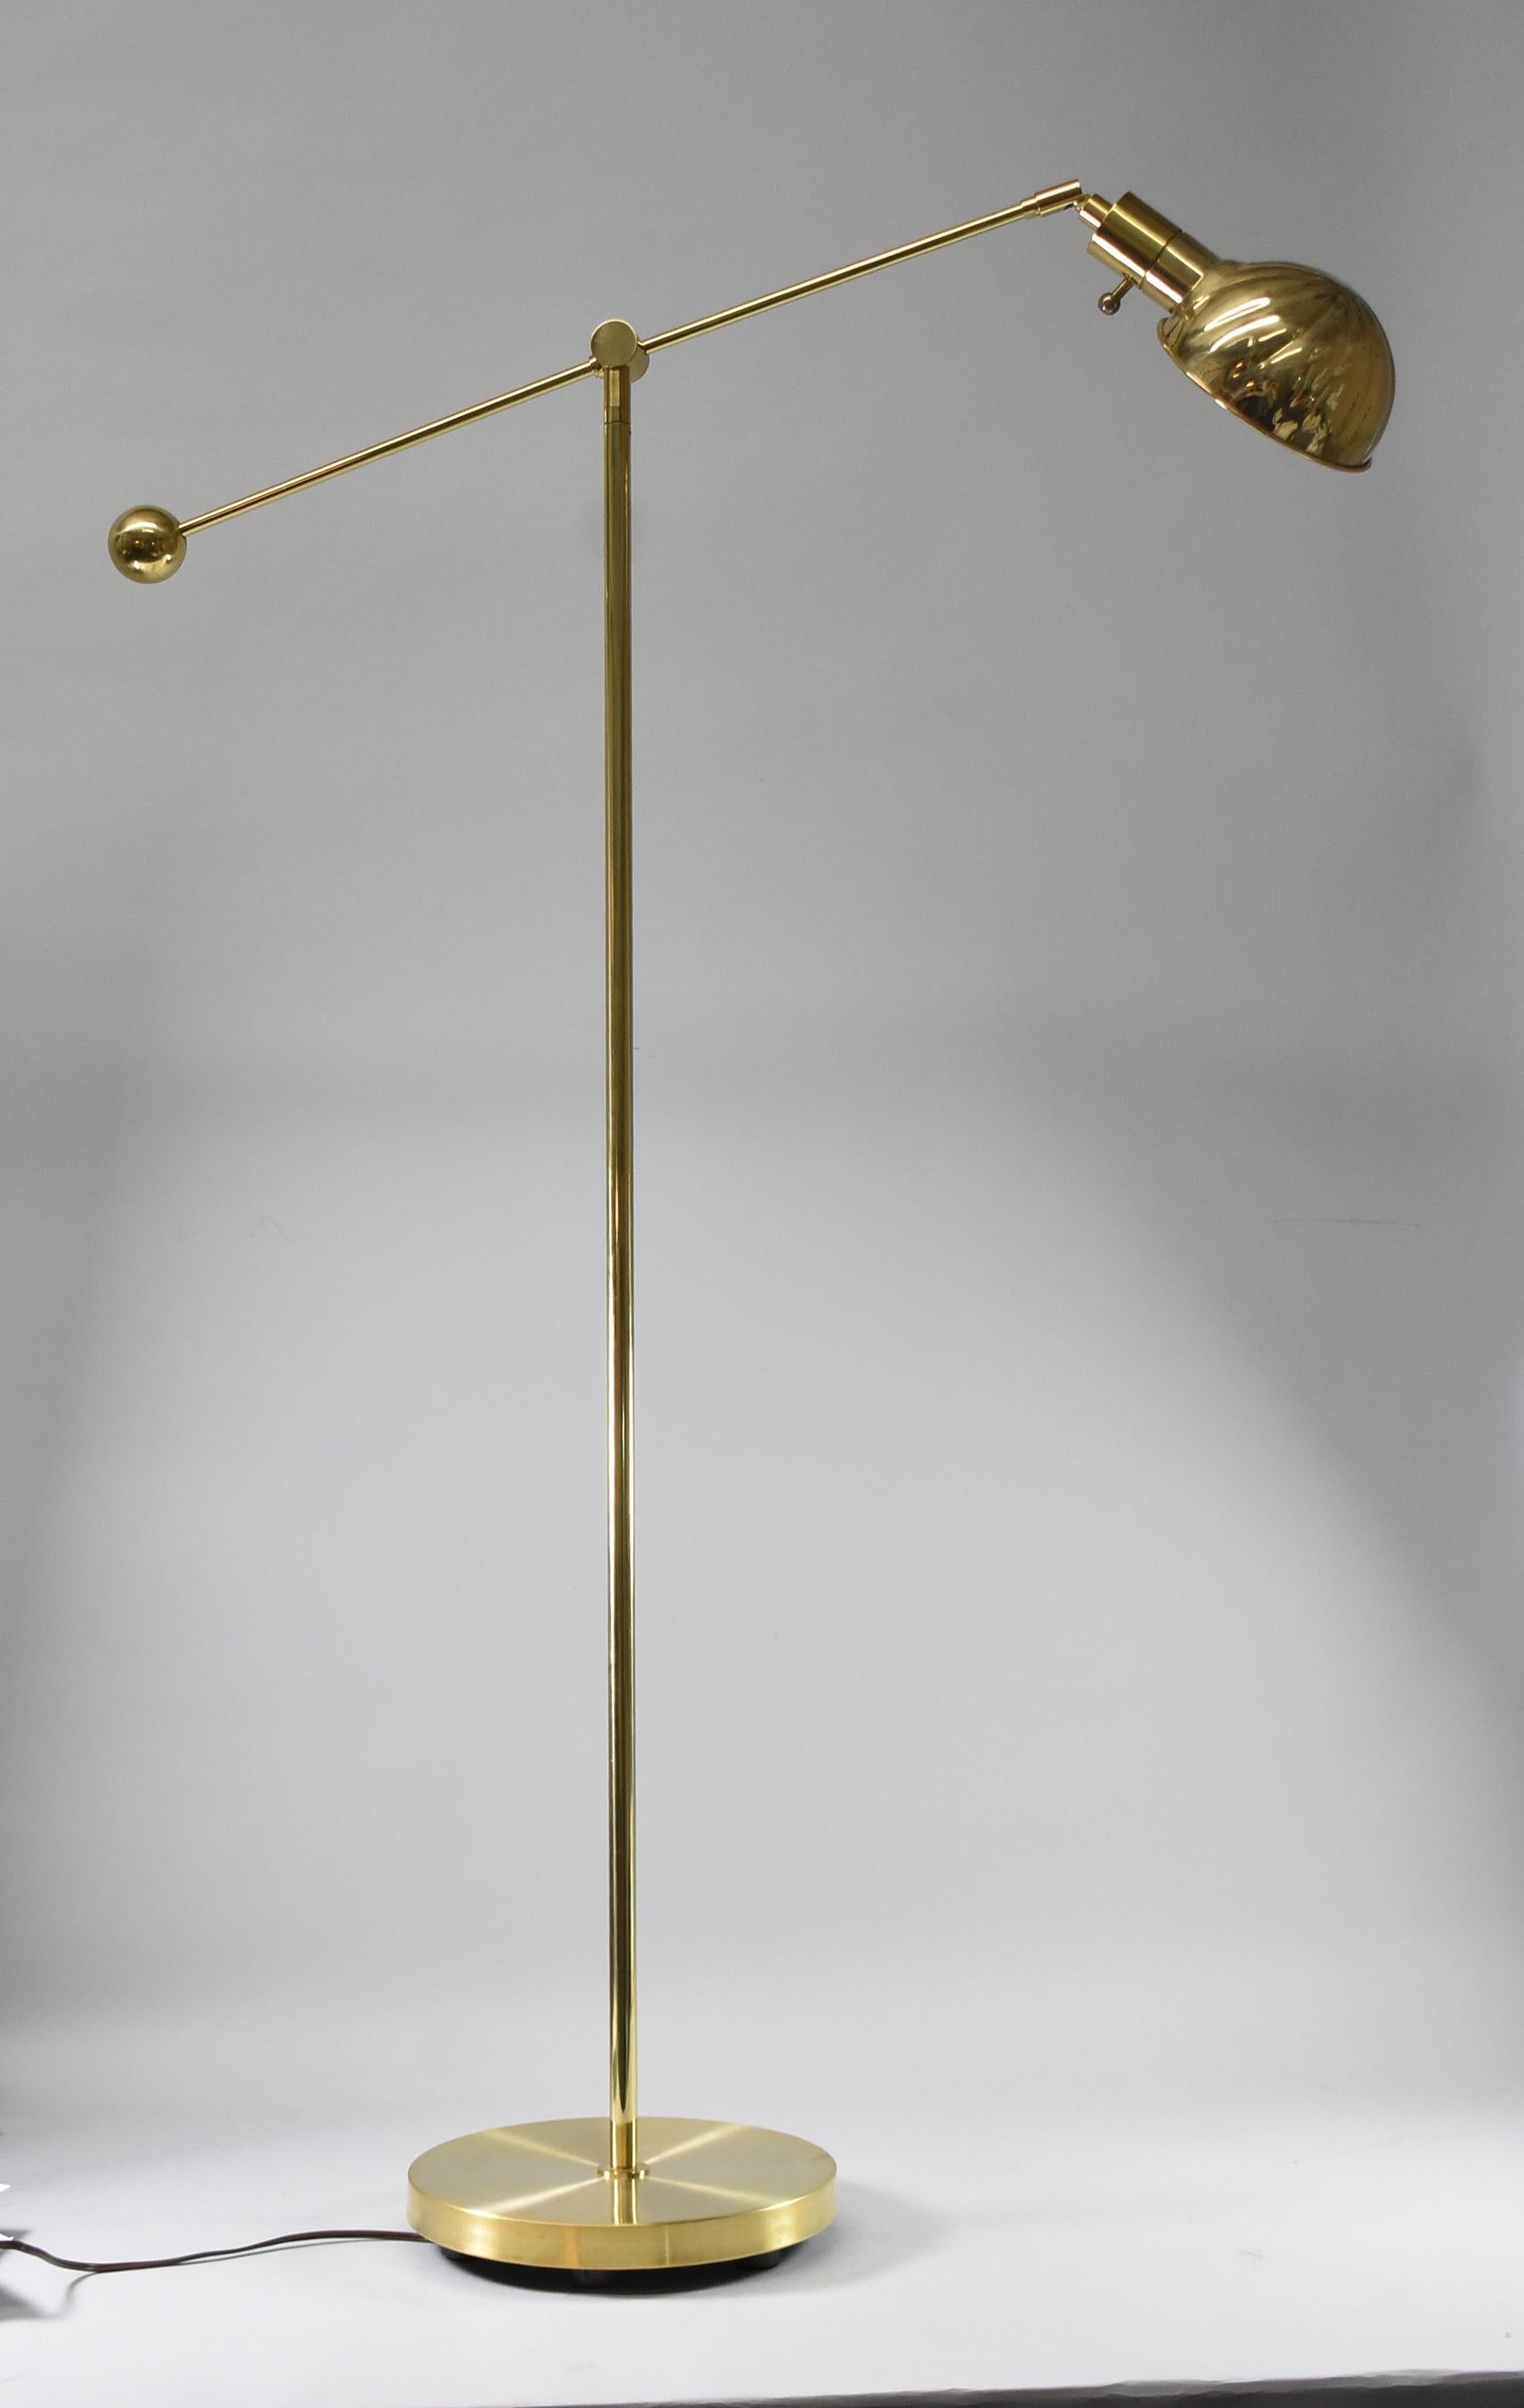 Brass Chapman cantilever floor lamp 1979. Counter-balanced cantilever brass floor lamp with shall design shade and integral switch. Cantilever arm sits atop tubular pole. Shade can be angled and rotated. Arm adjusts to different angles and swivels